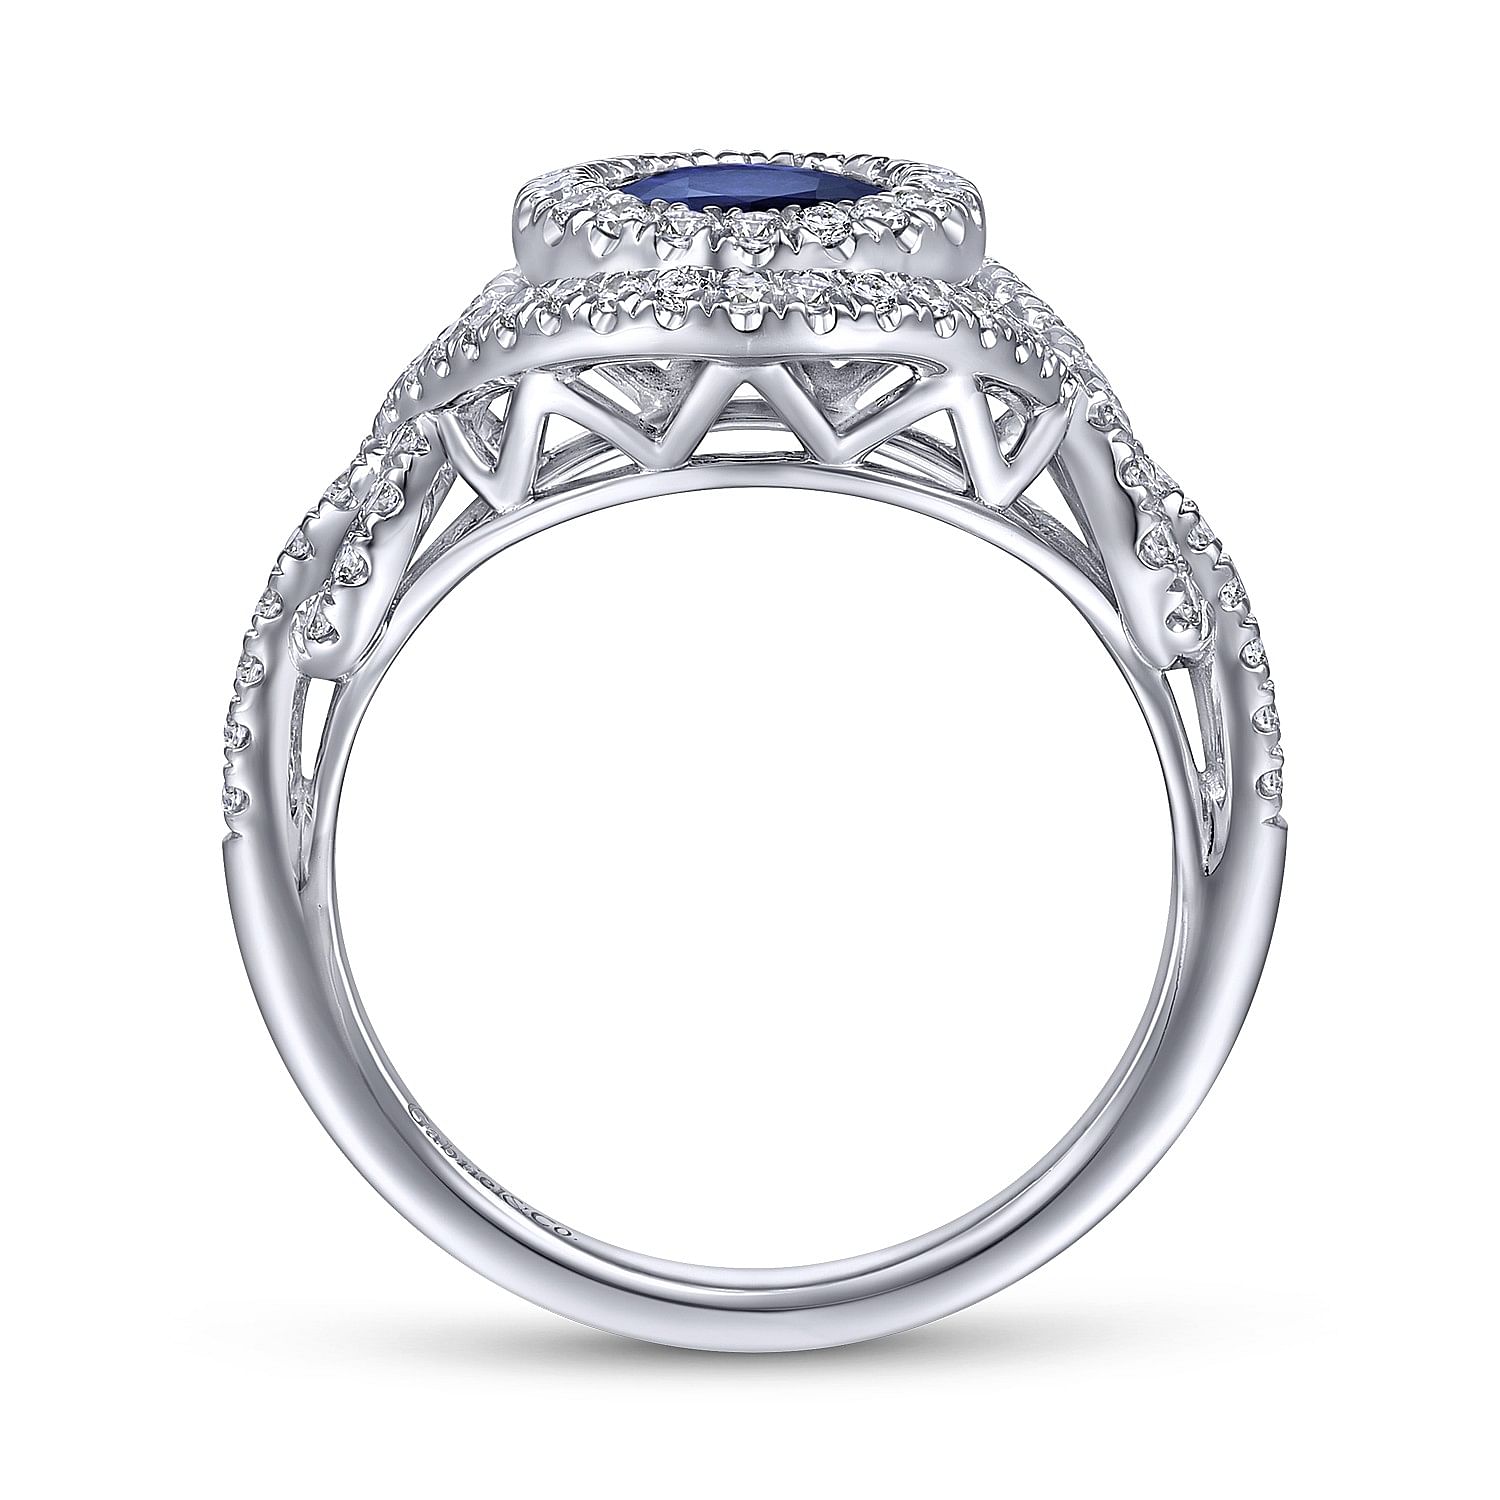 14K White Gold Oval Double Halo Sapphire and Diamond Engagement Ring